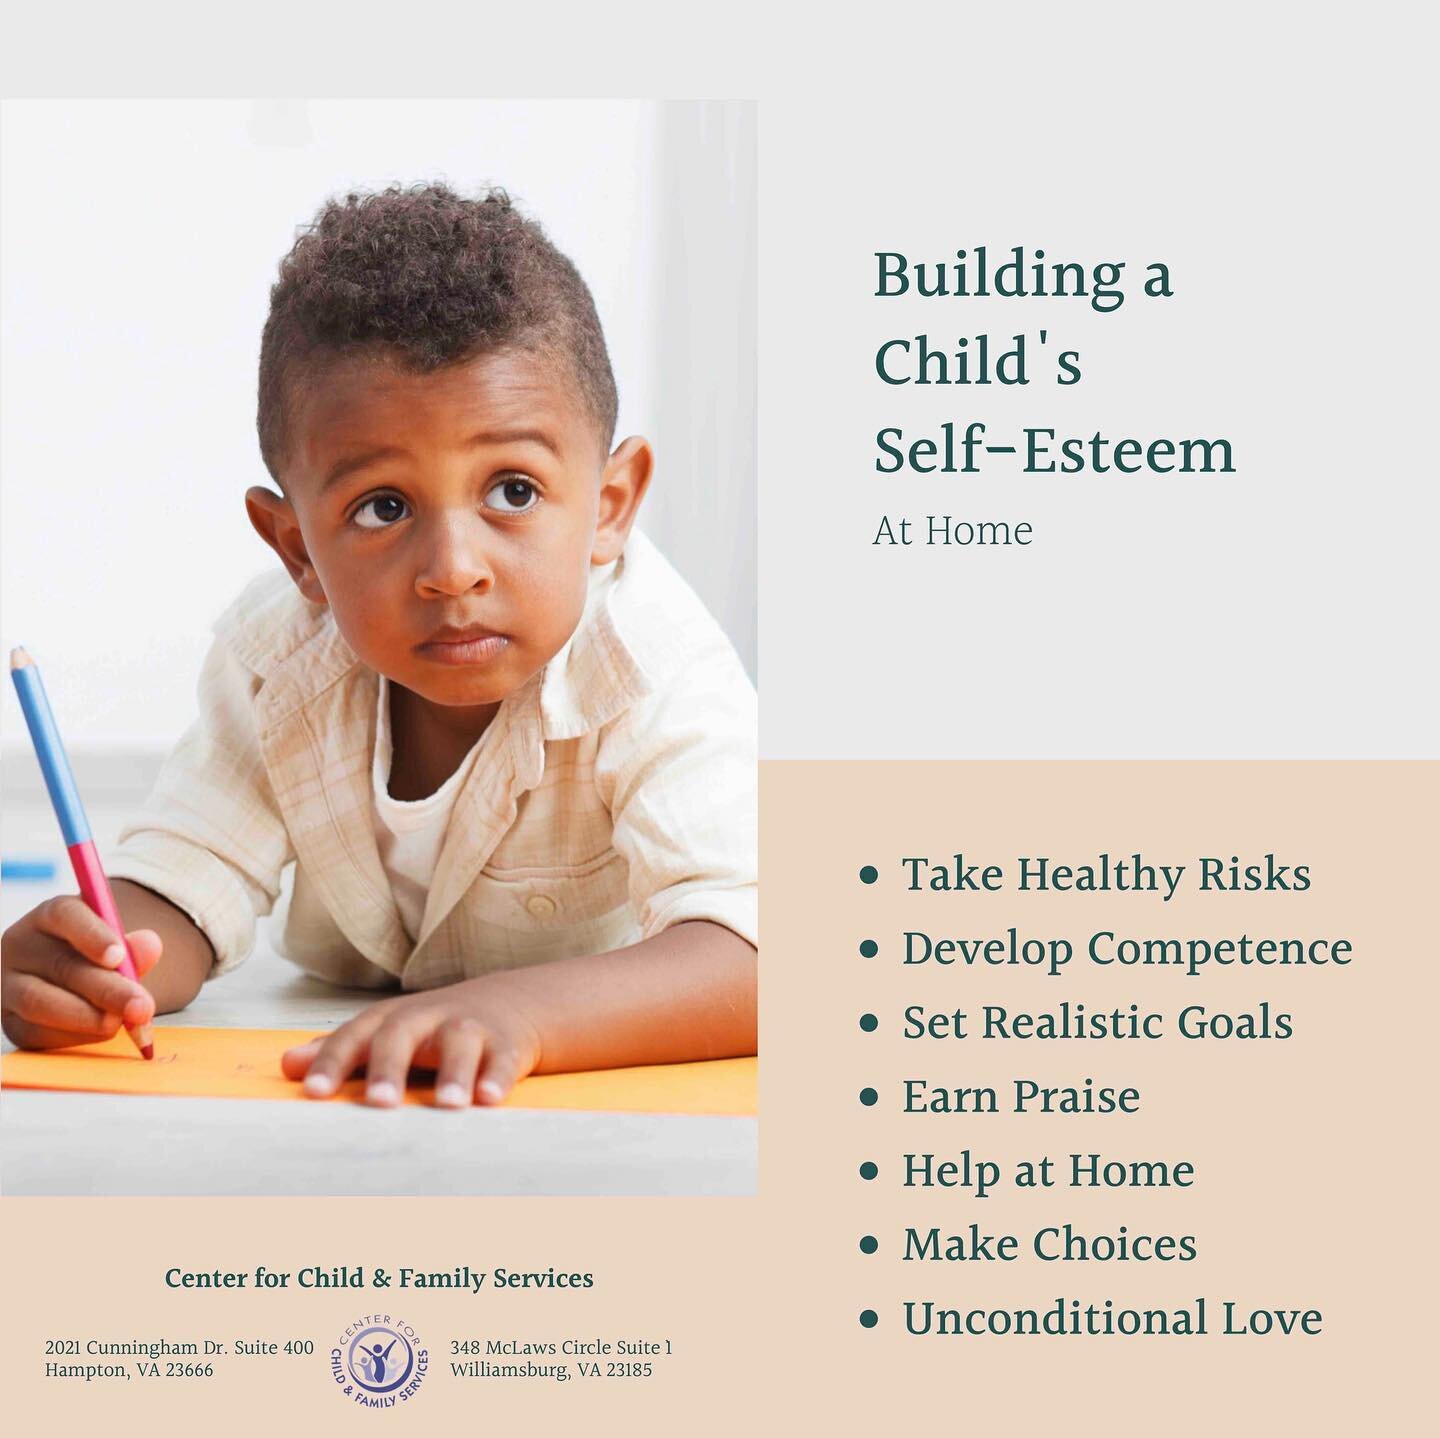 Community Connection 🖍 Building a Child&rsquo;s Self-Esteem at home * Take Healthy Risks
* Develop Competence
* Set Realistic Goals
* Earn Praise
* Help at Home
* Make Choices
* Unconditional Love